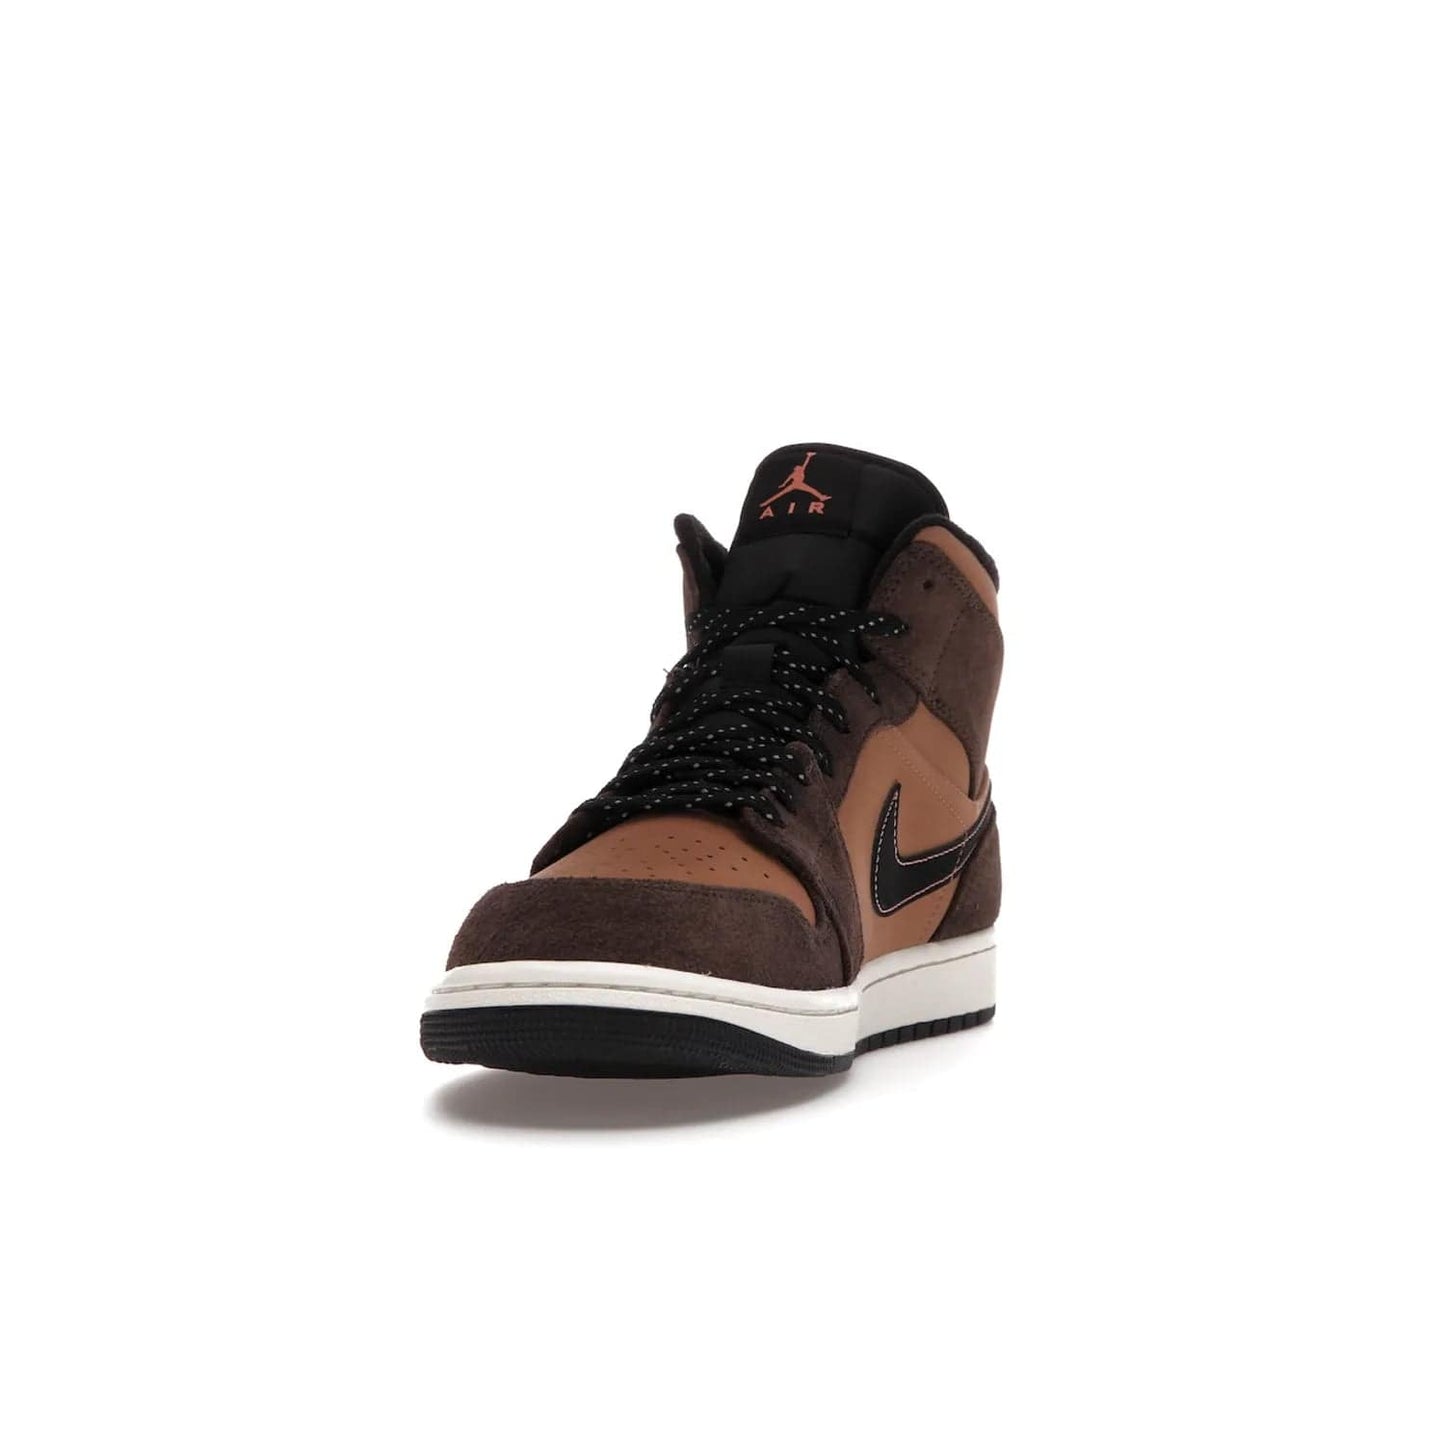 Jordan 1 Mid SE Dark Chocolate - Image 12 - Only at www.BallersClubKickz.com - This fashionable and functional Jordan 1 Mid SE Dark Chocolate features a light brown Durabuck upper, dark brown suede overlays, black Swoosh logos and reflective patch at heel. A must-have for any sneakerhead!